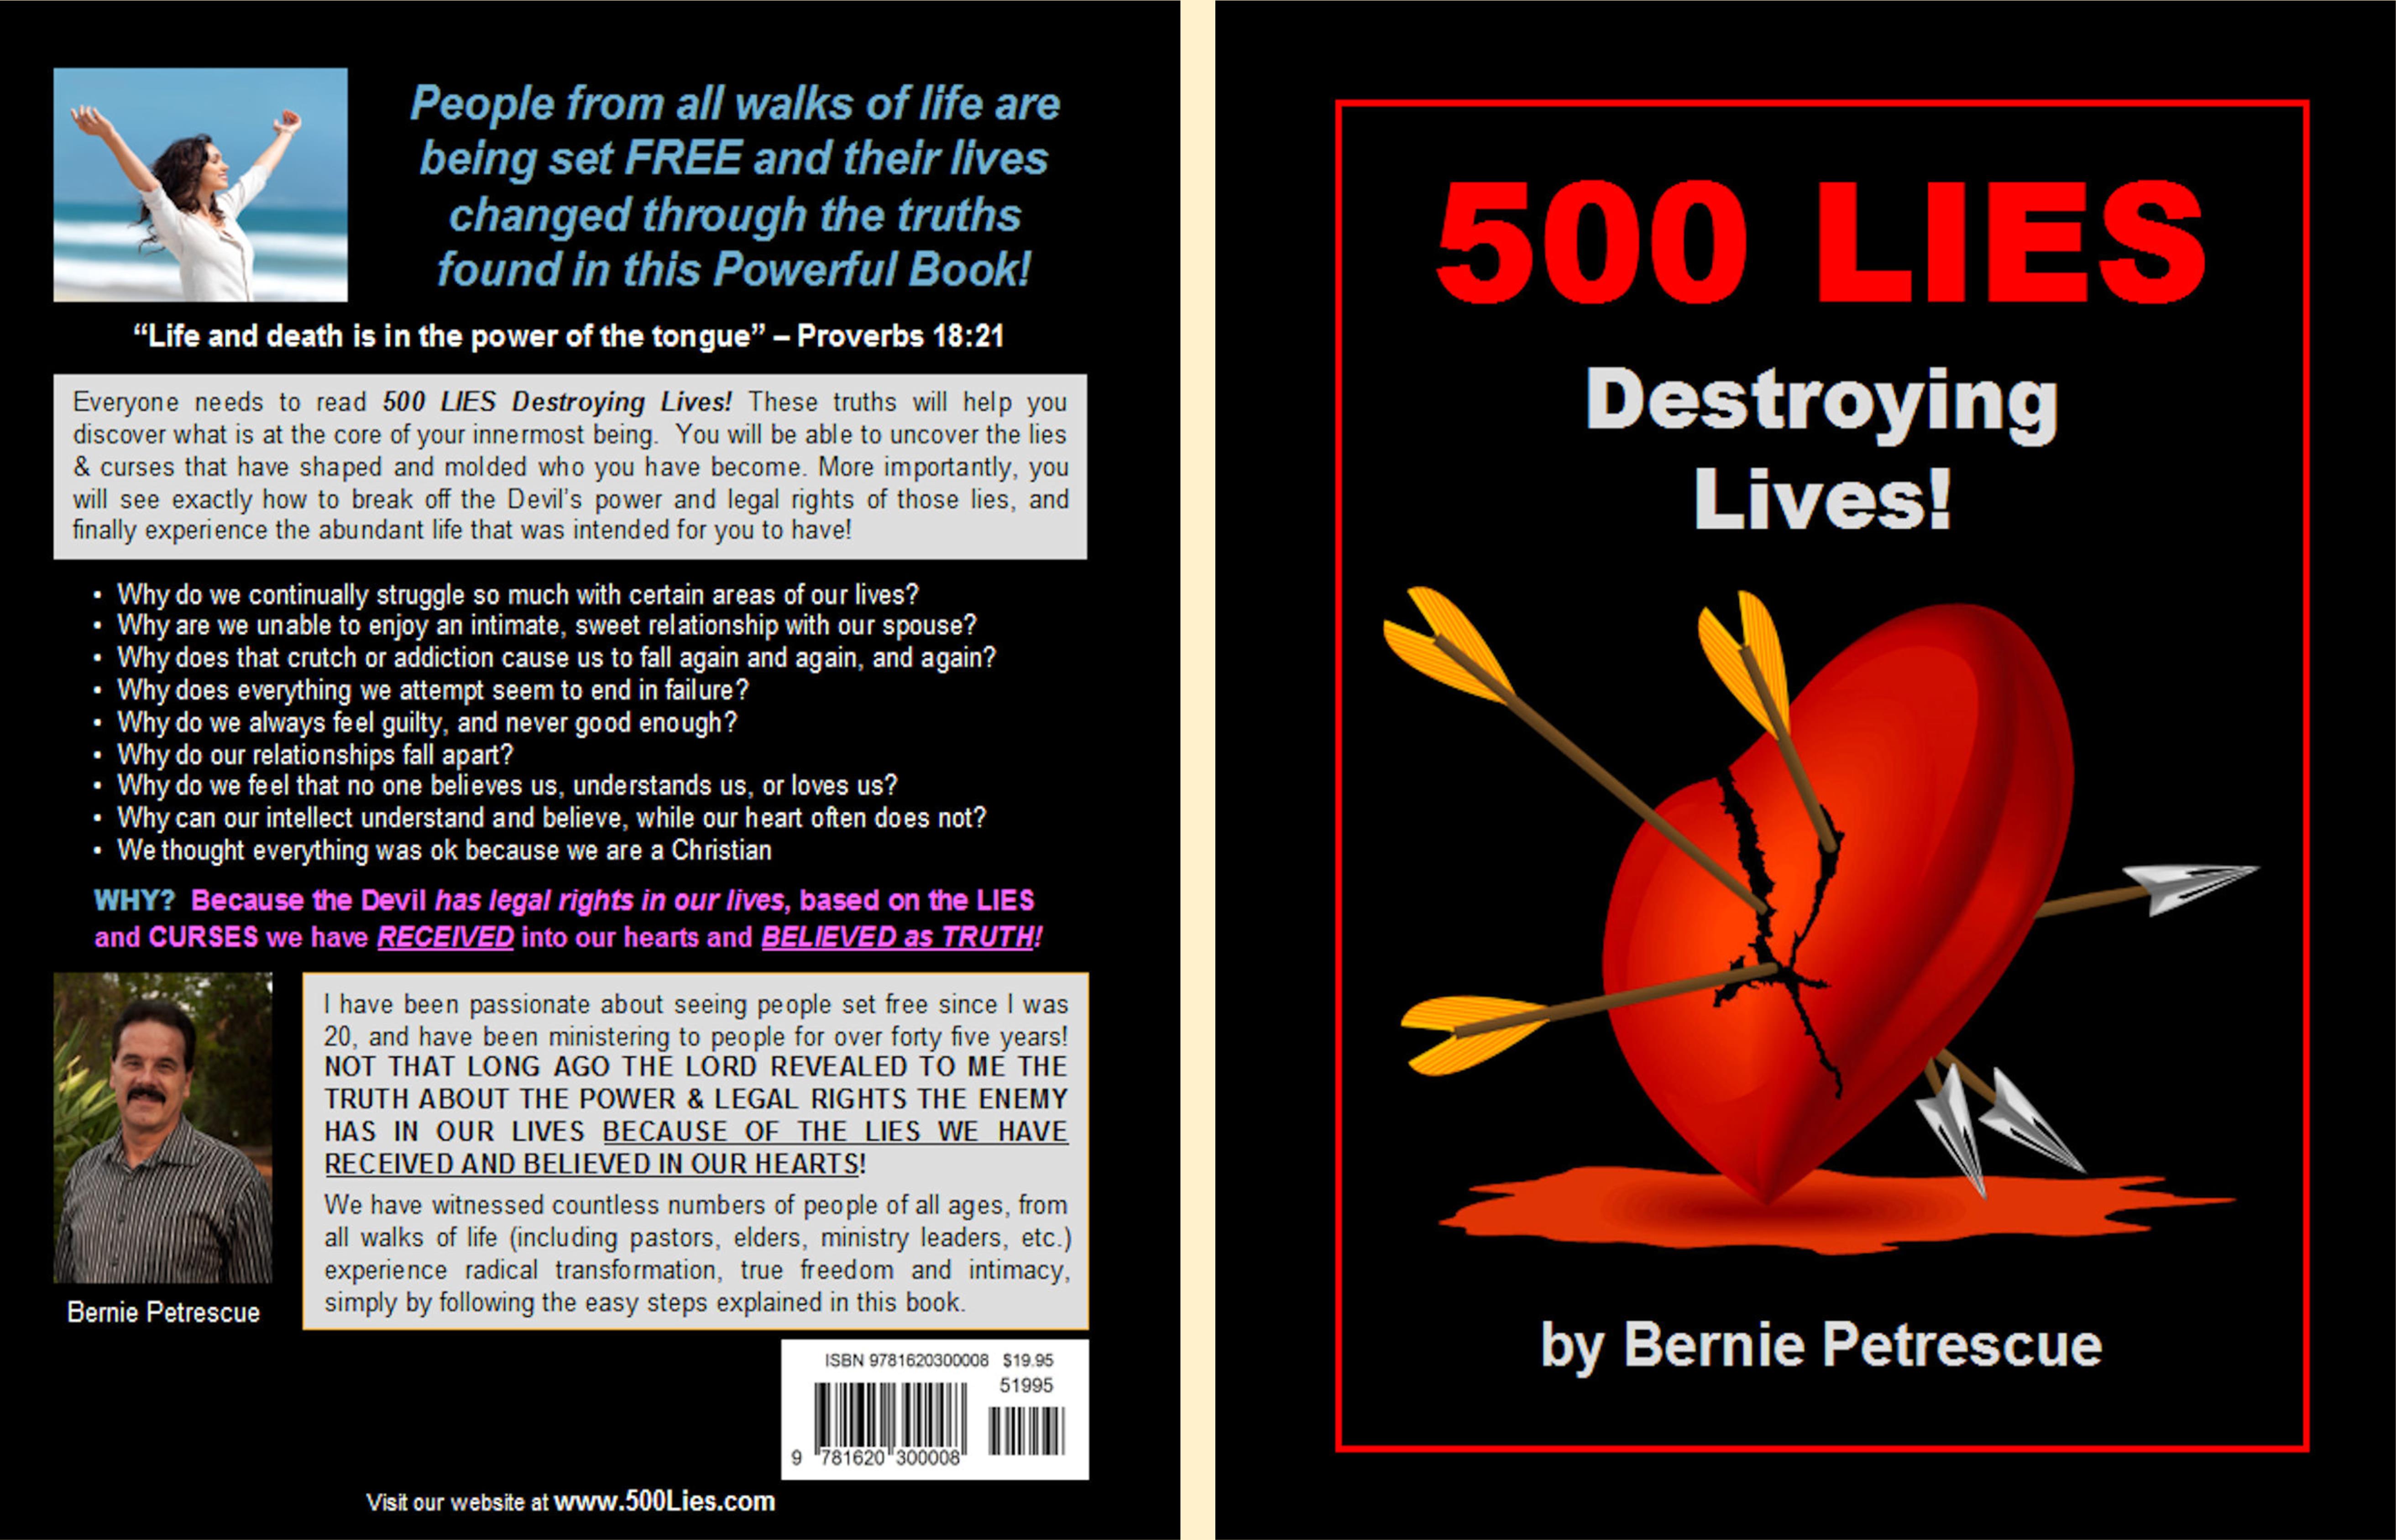 500 LIES Destroying Lives! cover image